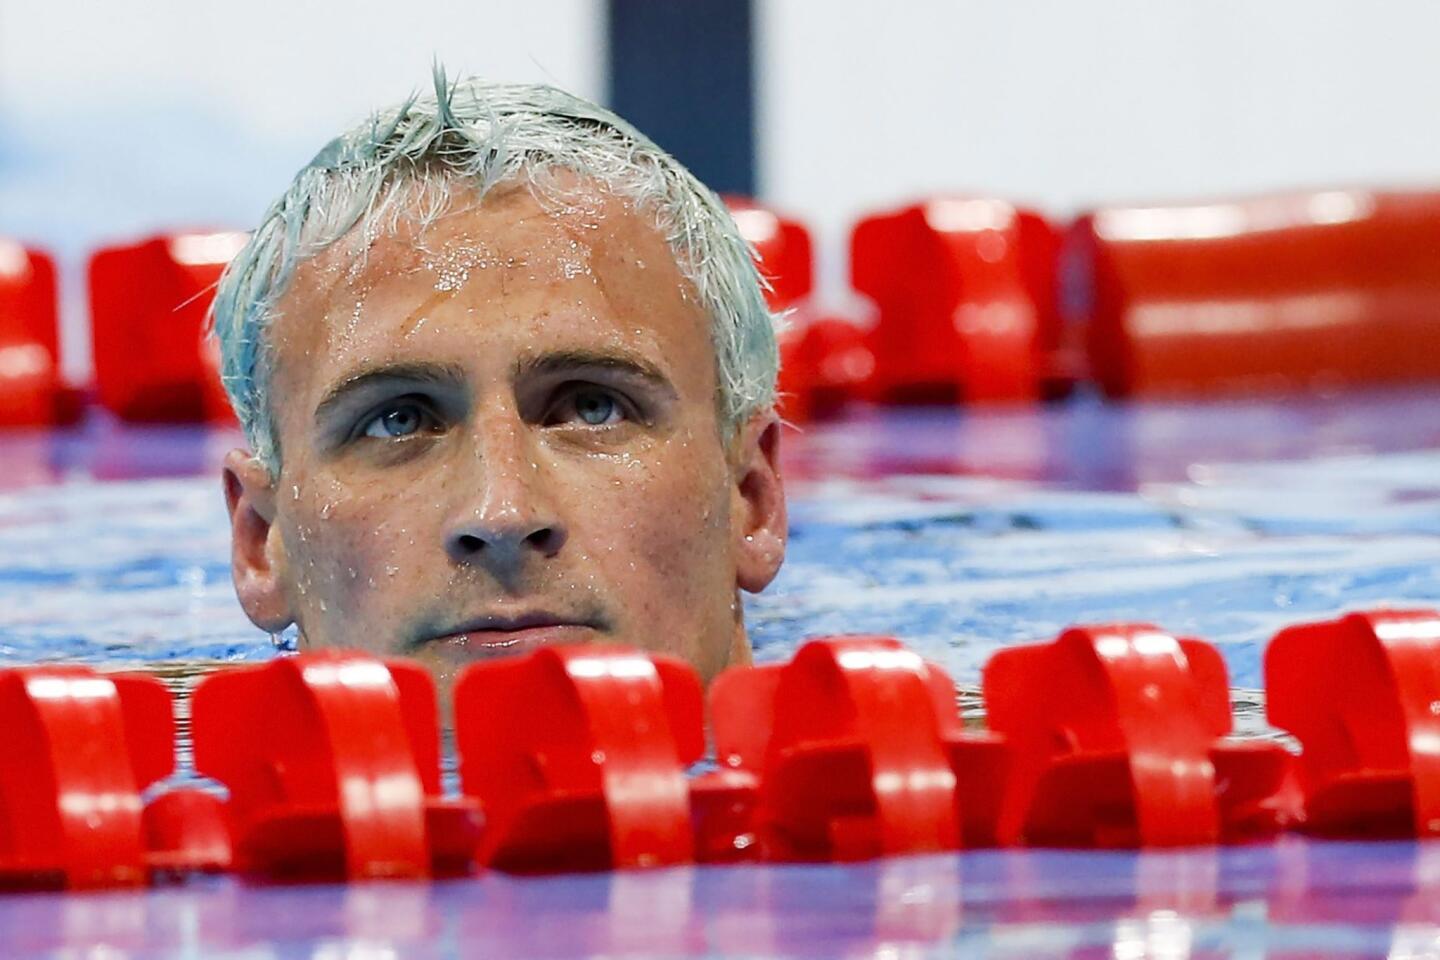 Ryan Lochte of the USA reacts after competing in the men's 200m Individual Medley Final of the Rio 2016 Olympic Games Swimming events at Olympic Aquatics Stadium at the Olympic Park in Rio de Janeiro, Brazil, August 11, 2016.